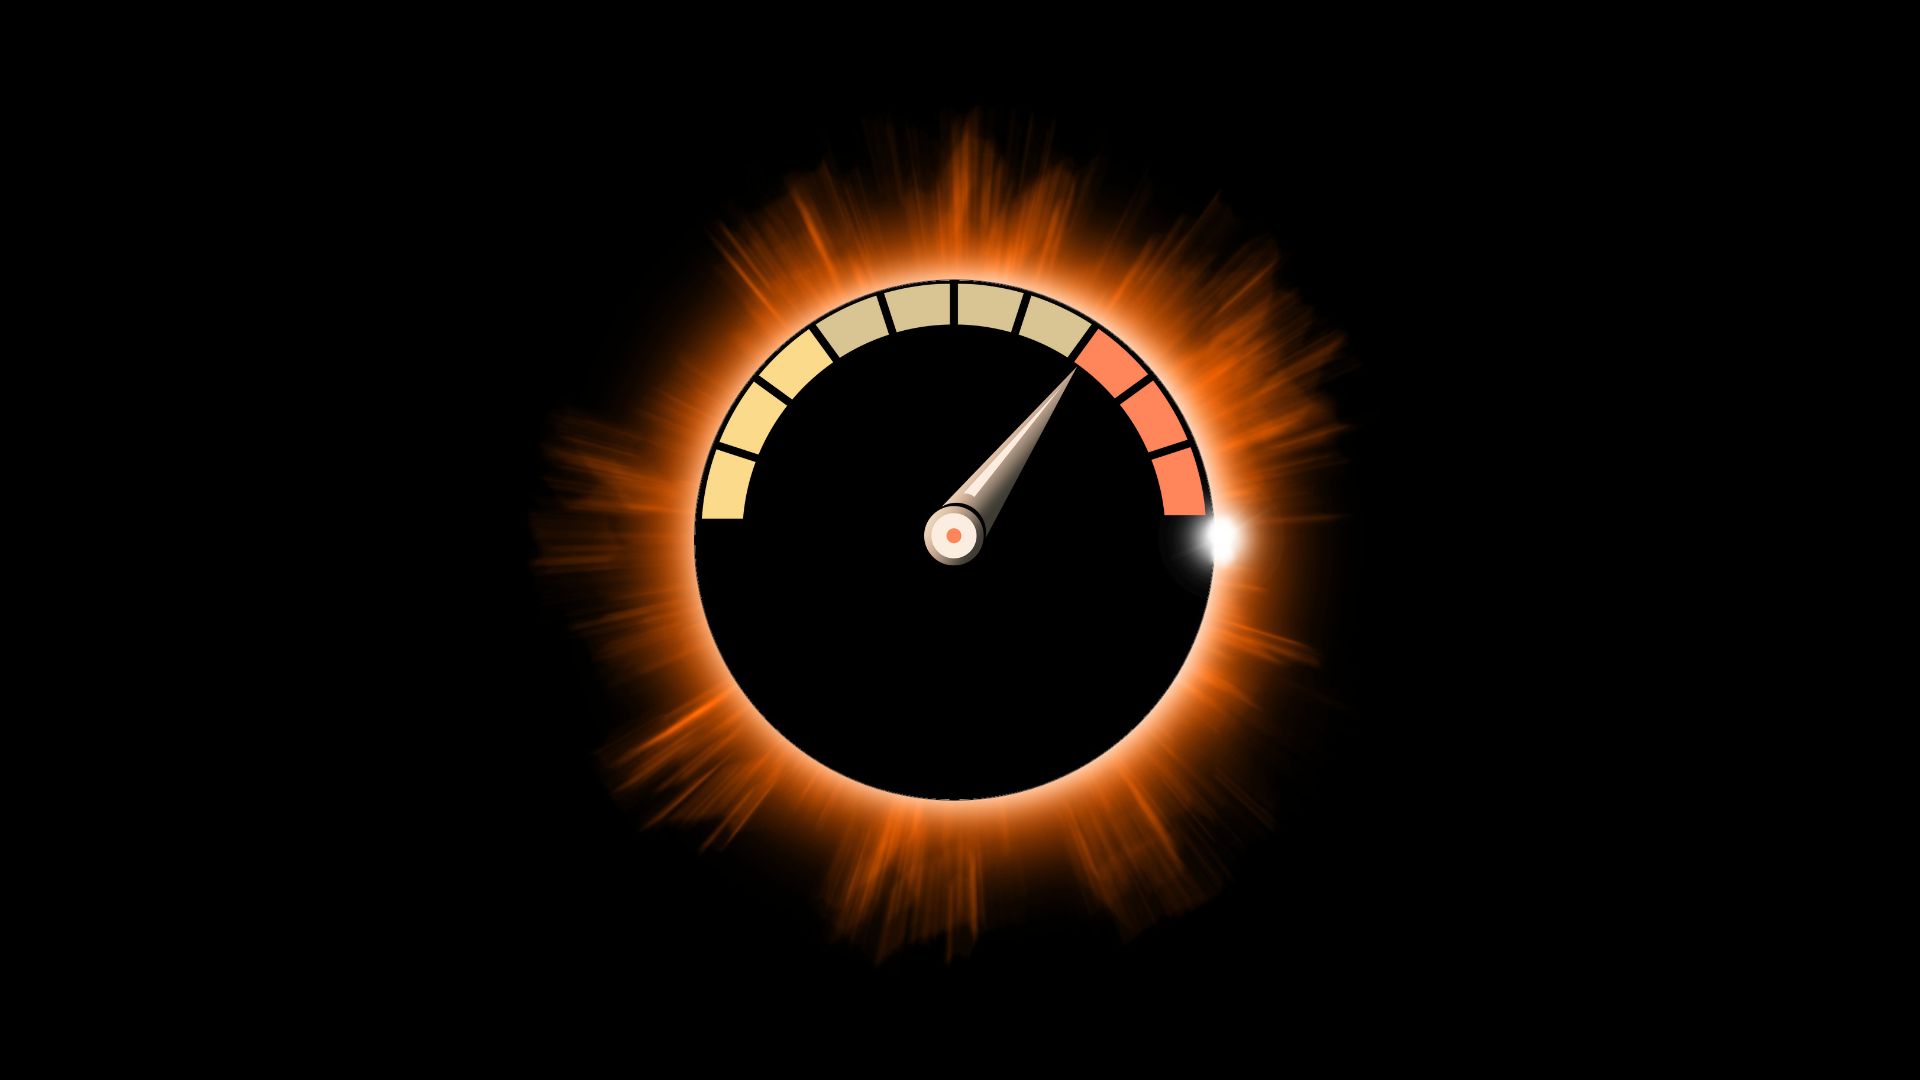 graphic illustration depicting how fast a solar eclipse travels with a speedometer graphic overlaid on top of a graphic of a solar eclipse.